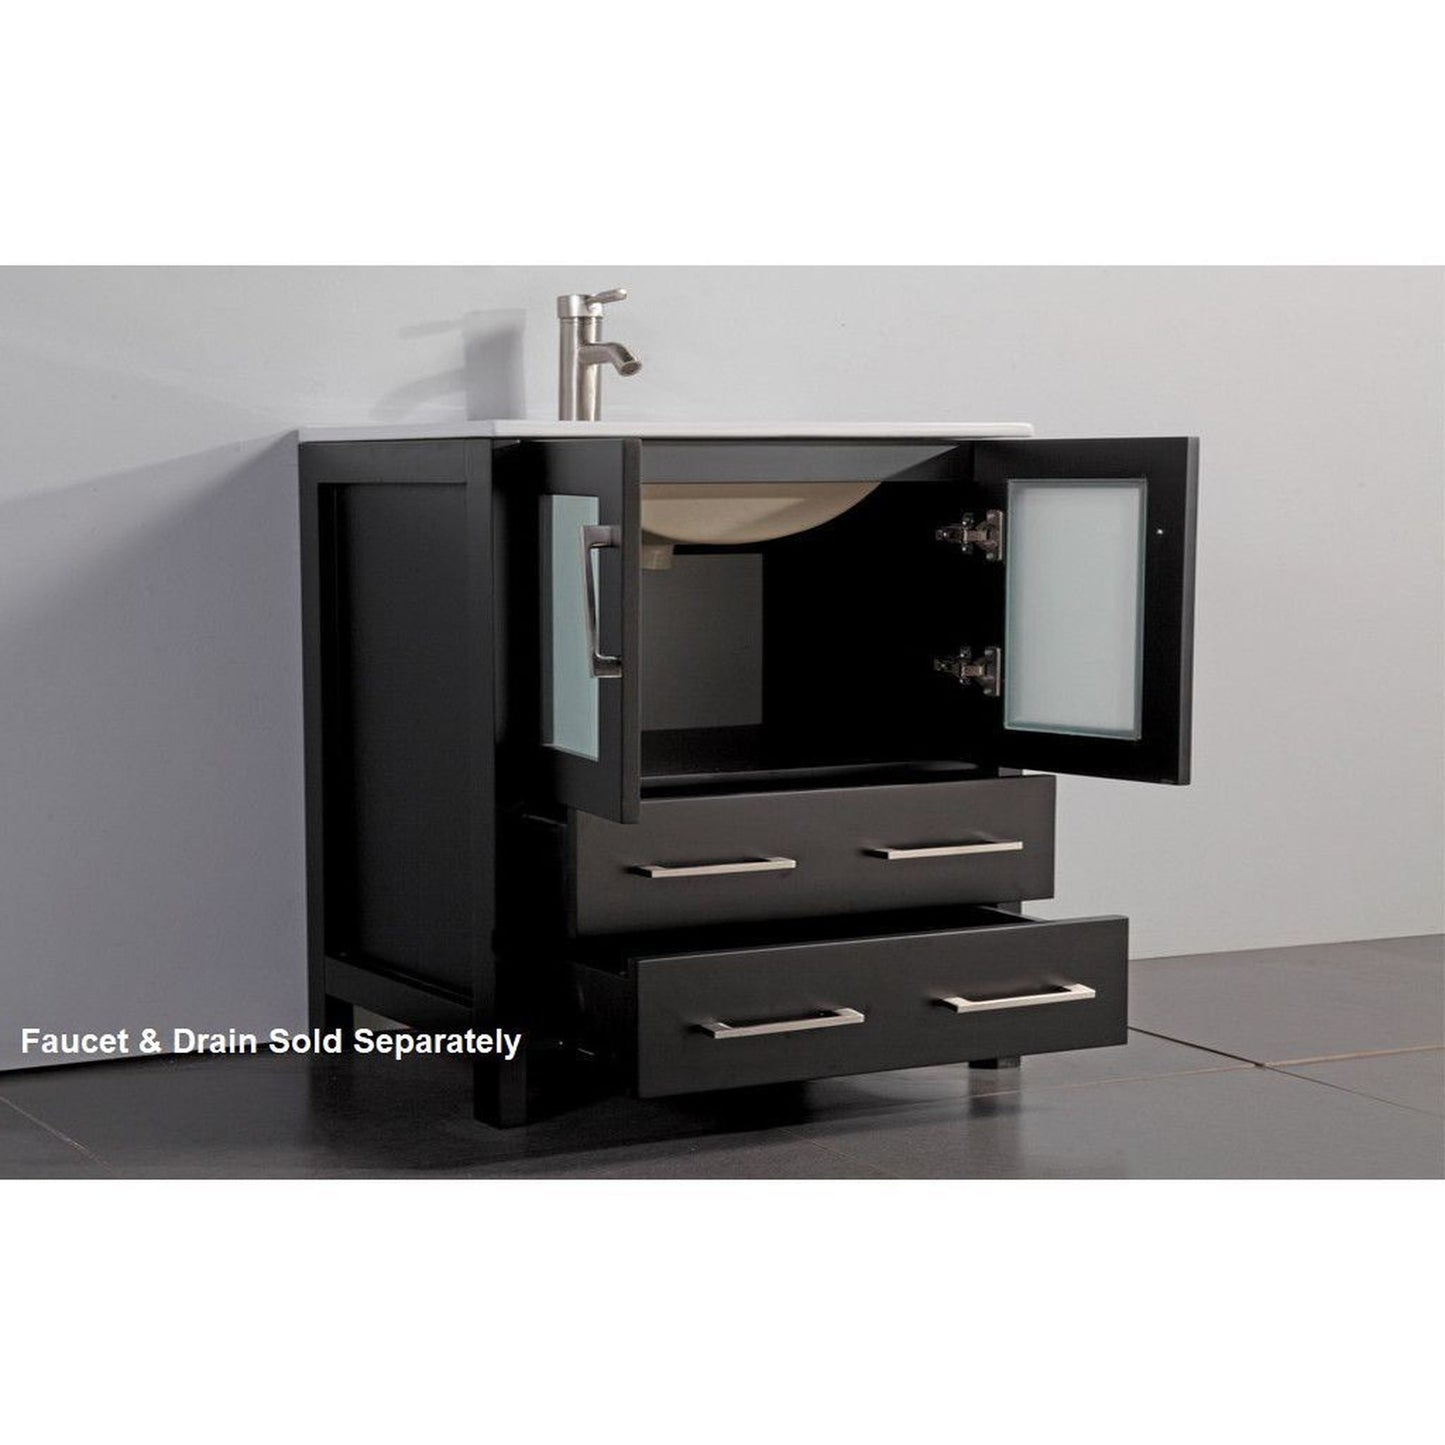 Vanity Art VA30 96" Double Espresso Freestanding Modern Bathroom Vanity Set With Integrated Ceramic Sink, Compact 2 Shelves, 13 Dovetail Drawers Cabinet And 2 Mirrors